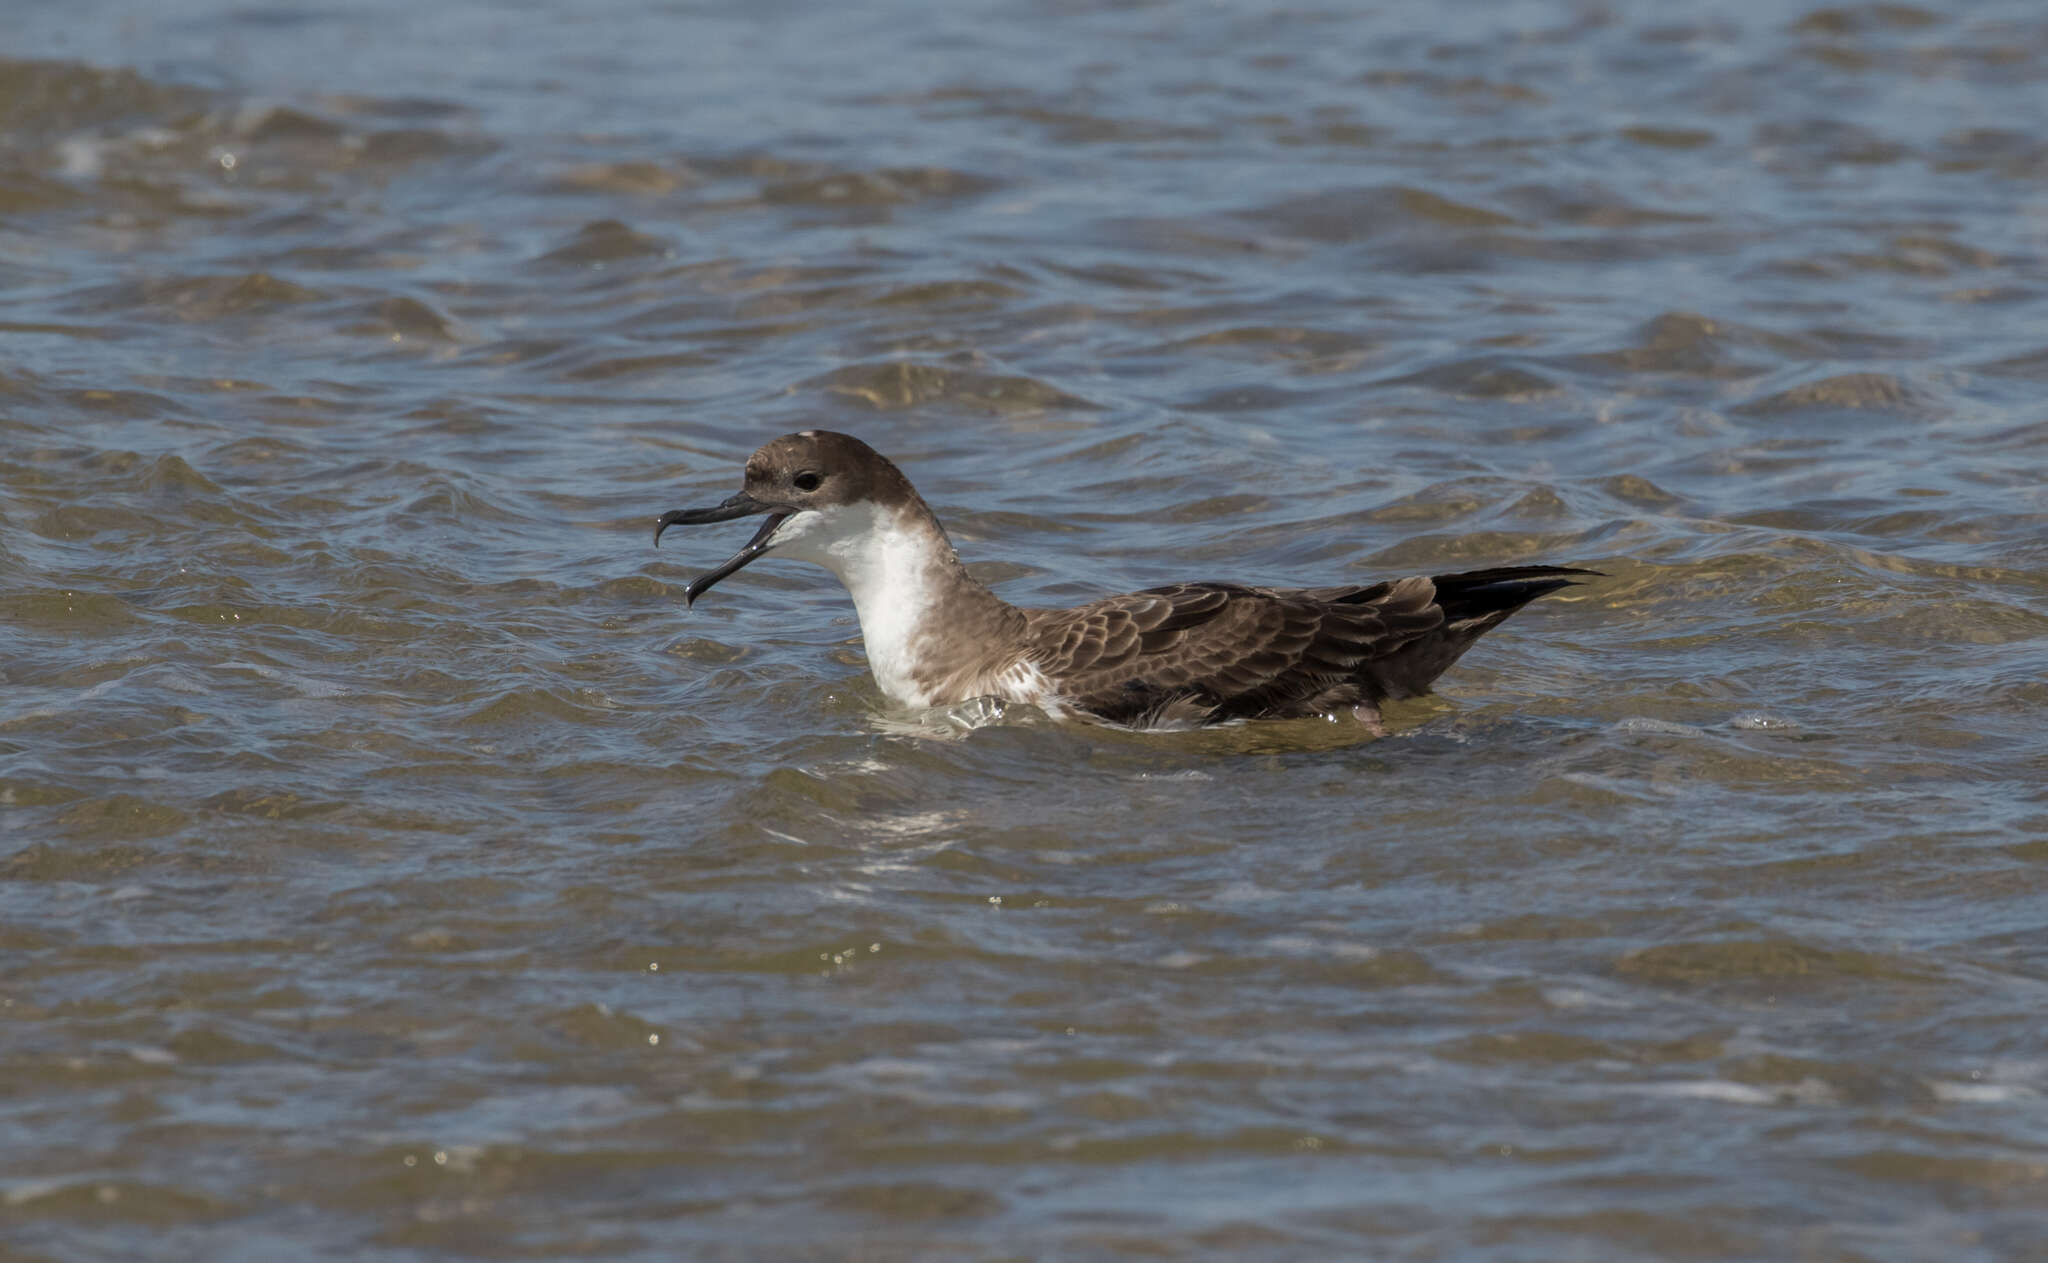 Image of Great Shearwater